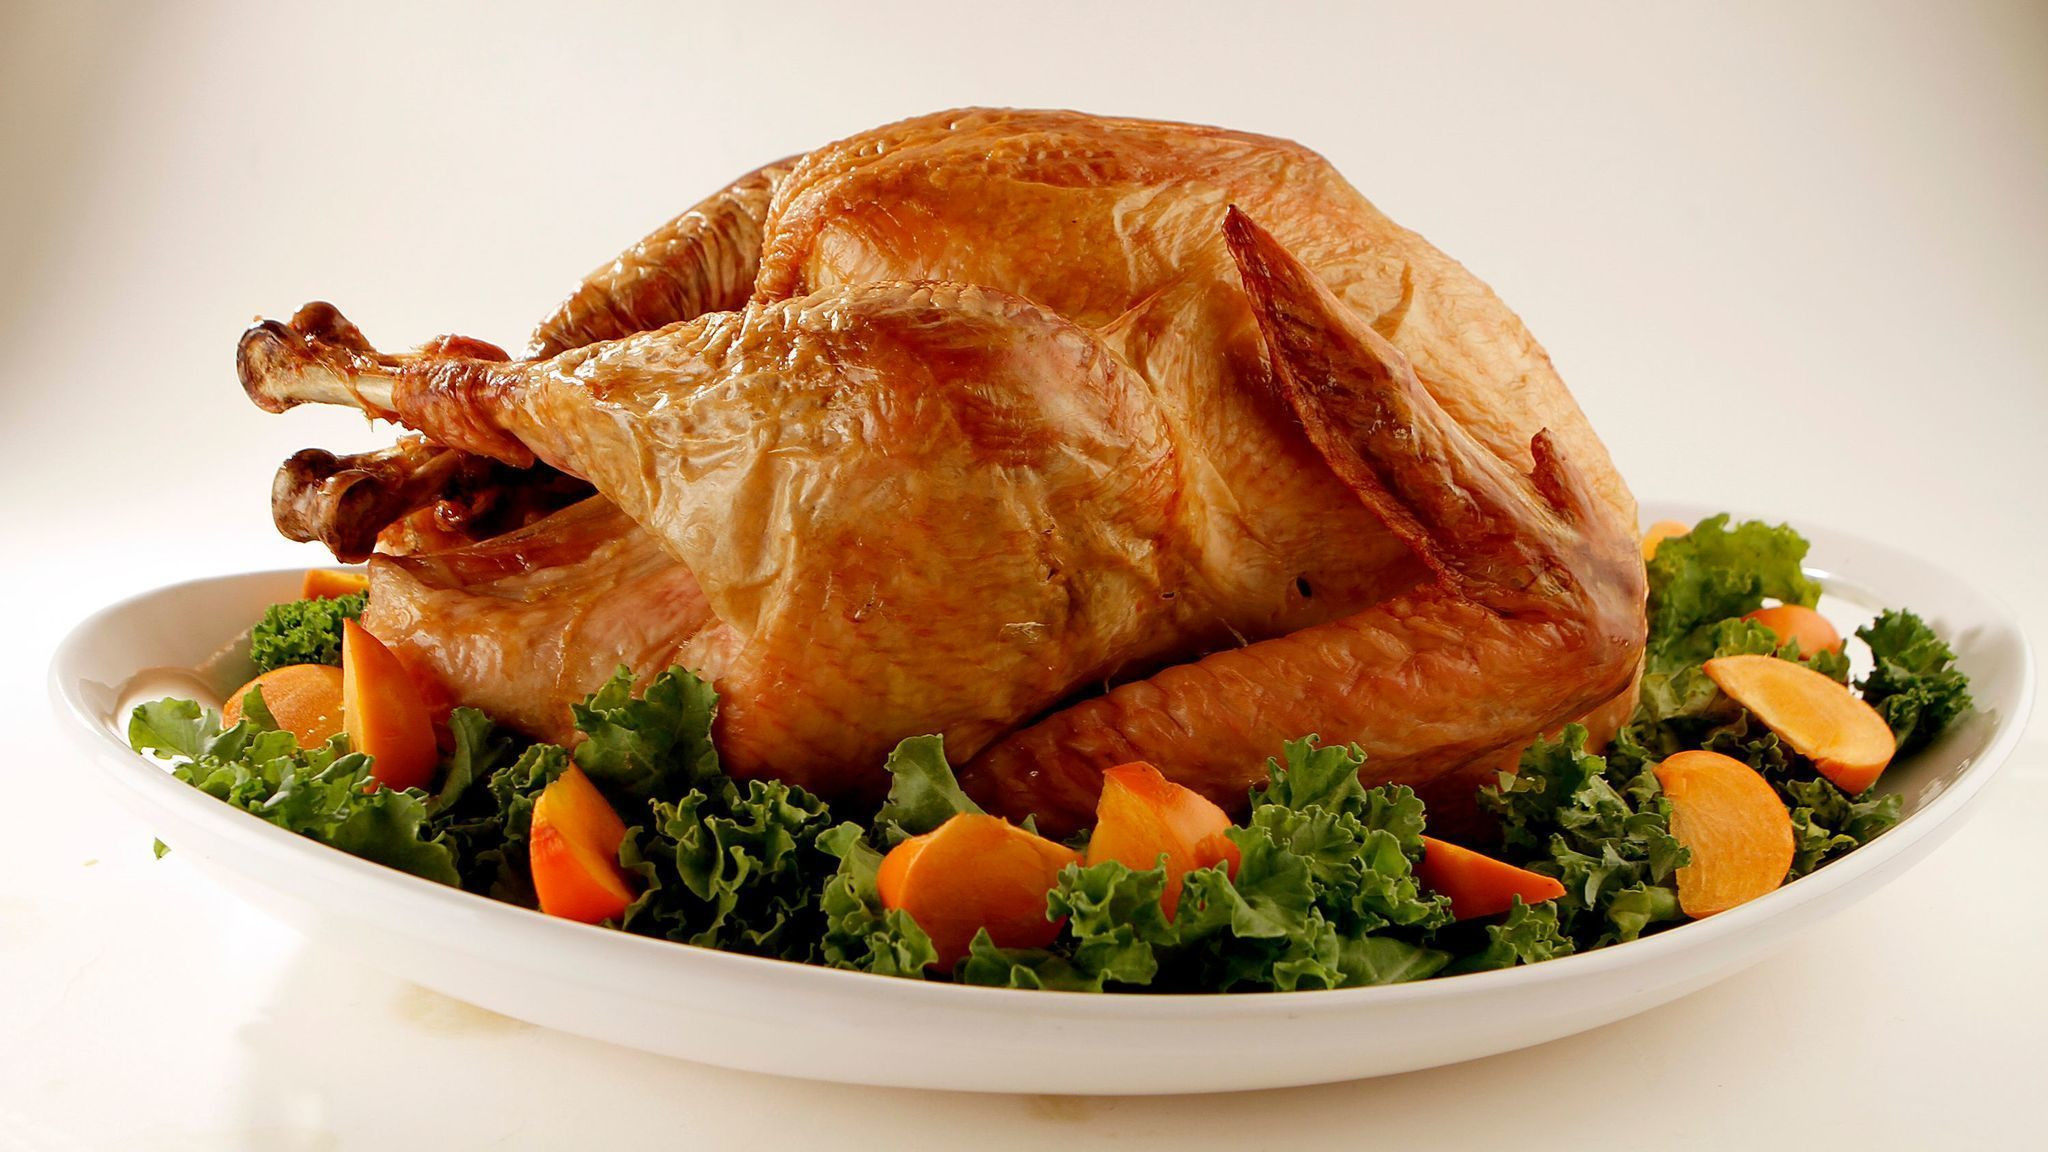 Thanksgiving Turkey Picture
 A beginner s guide to cooking a Thanksgiving turkey LA Times